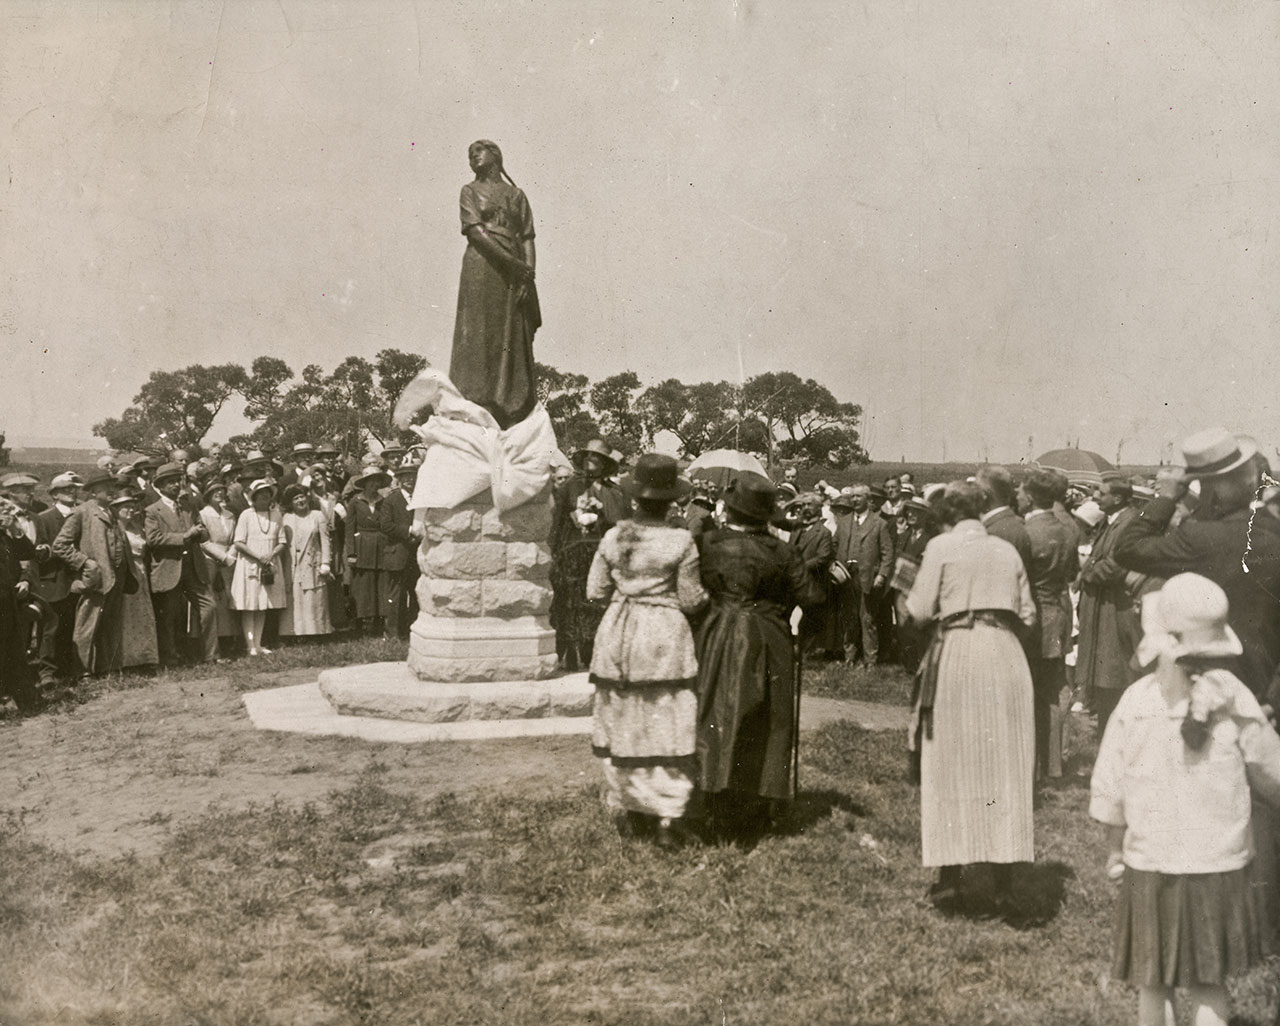 People gathered around the statue of Evangeline for its unveiling.